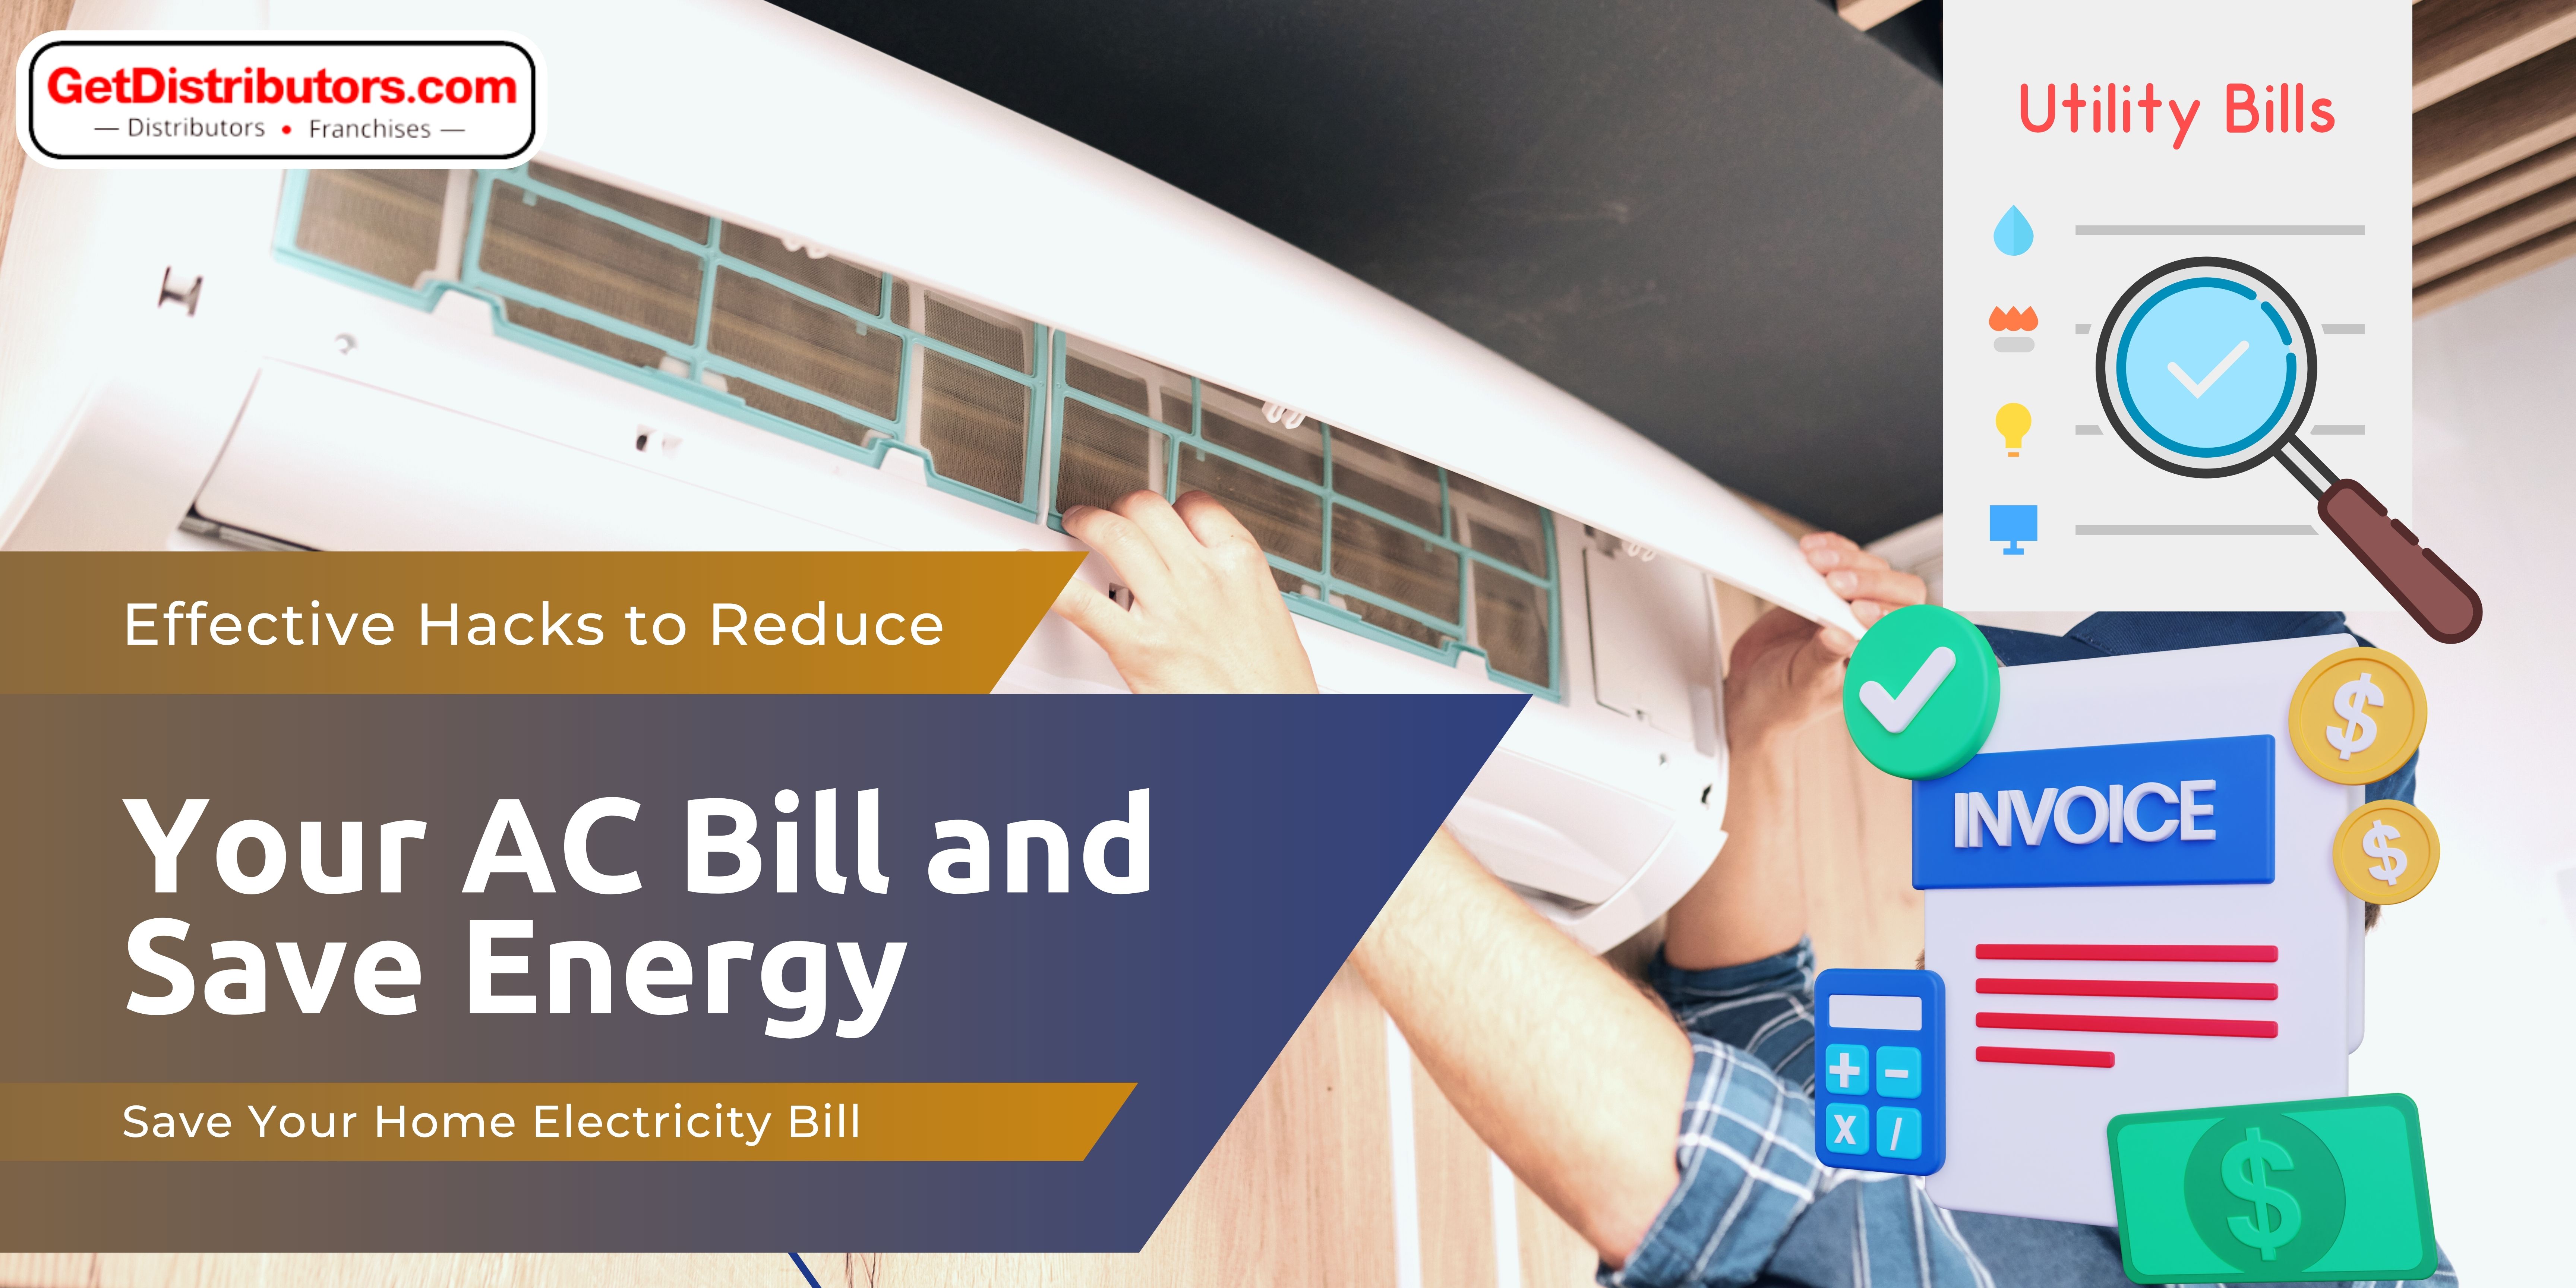 Effective Hacks to Reduce Your AC Bill and Save Energy